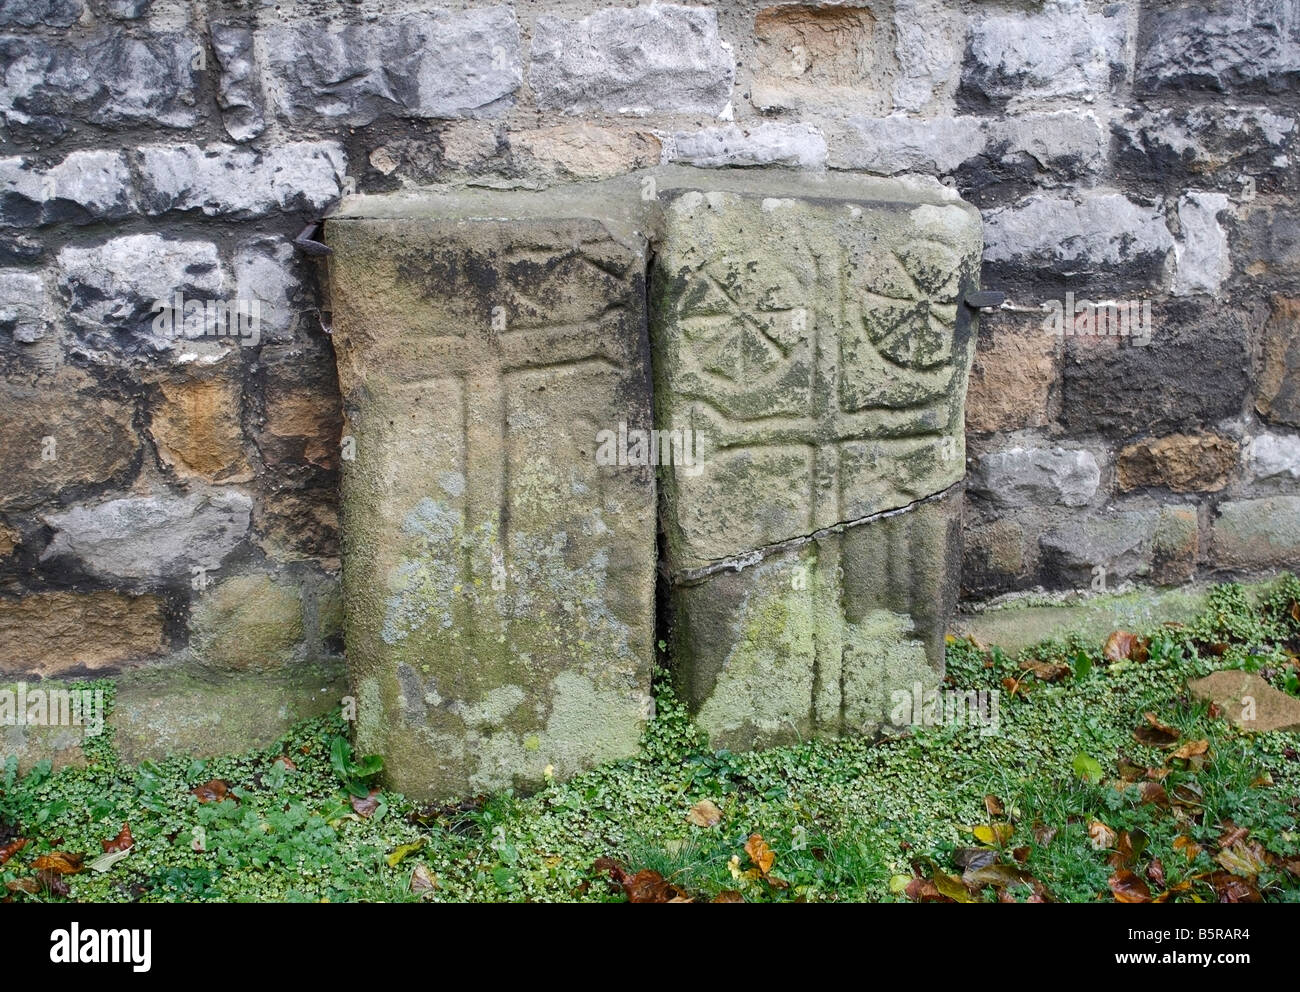 Early hand carved medieval grave markers Headstones at Eyam in Derbyshire England UK Village churchyard Stock Photo